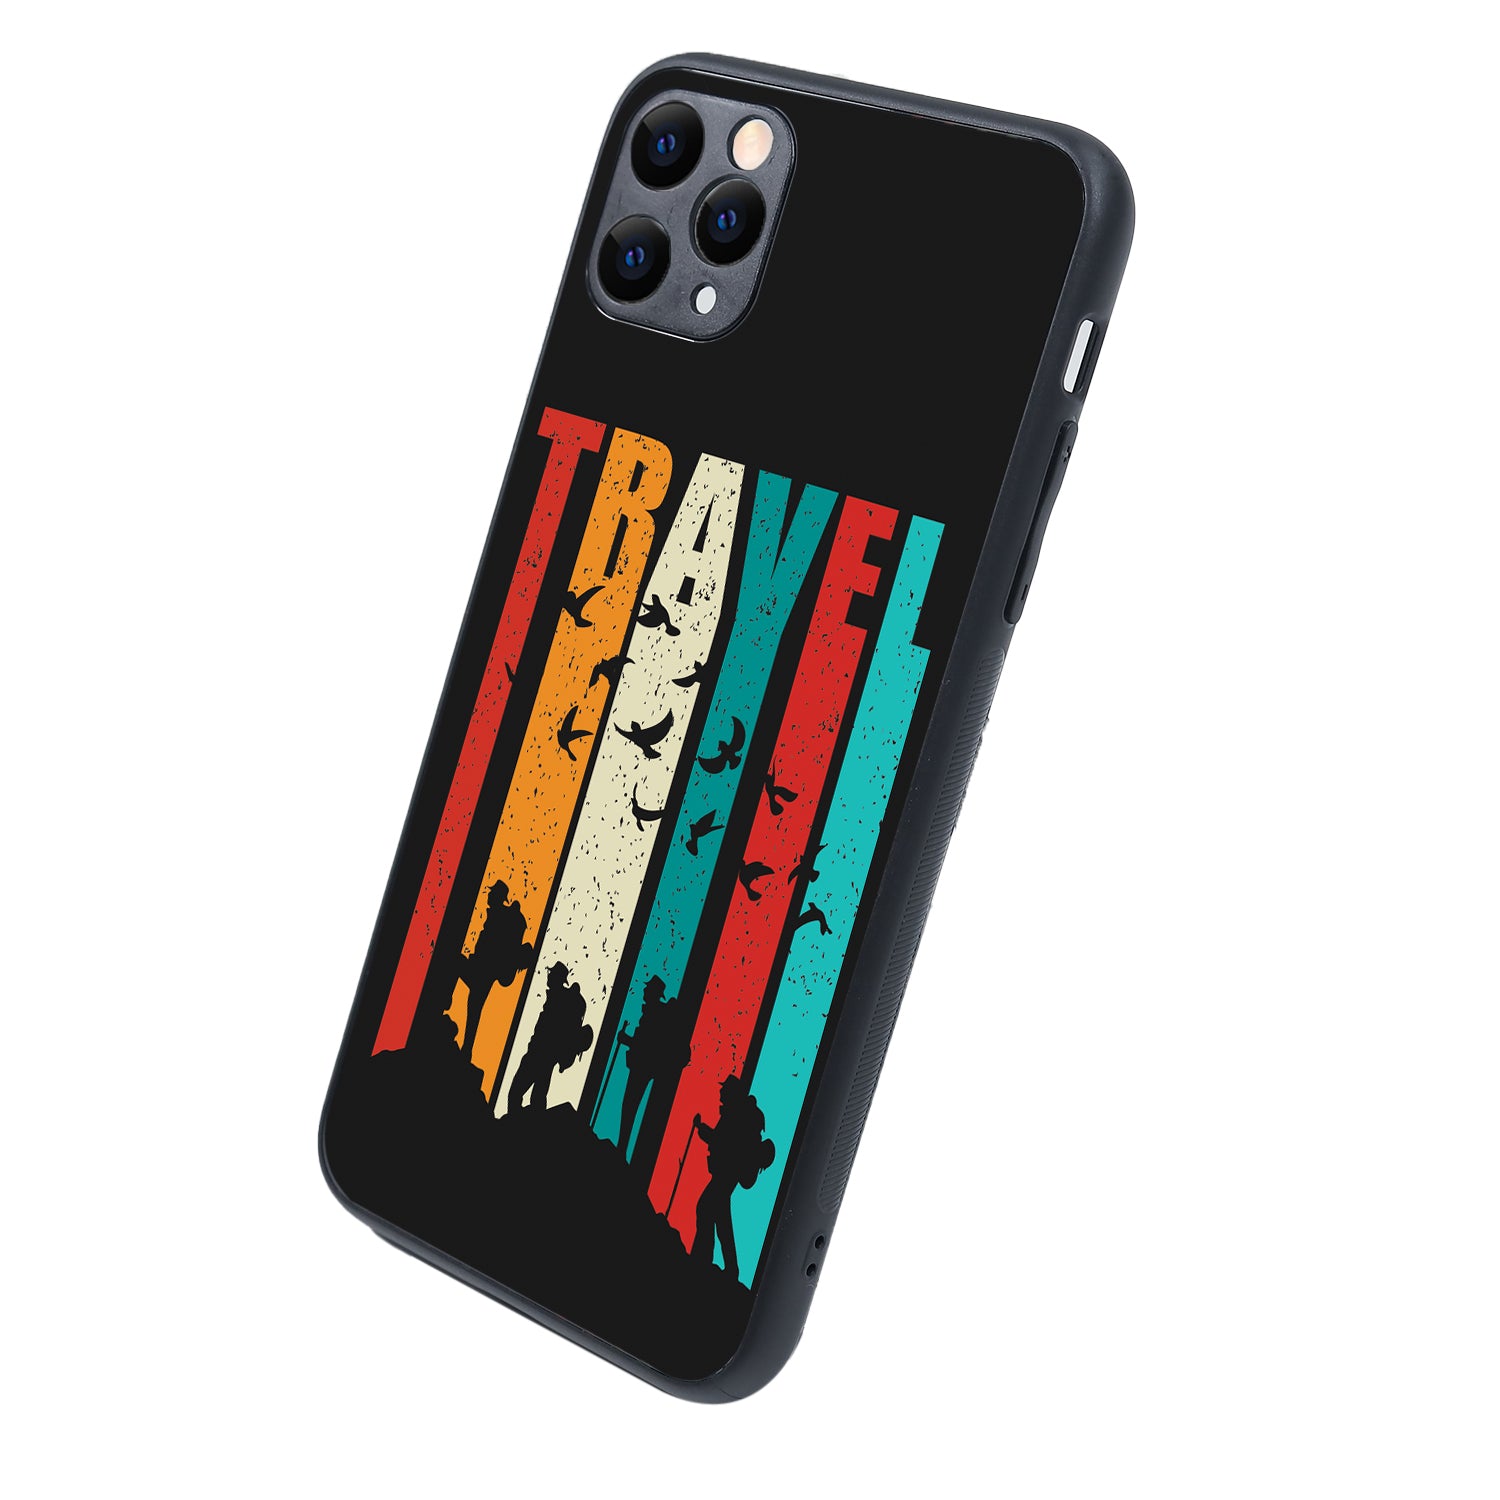 Travel Travelling iPhone 11 Pro Max Case